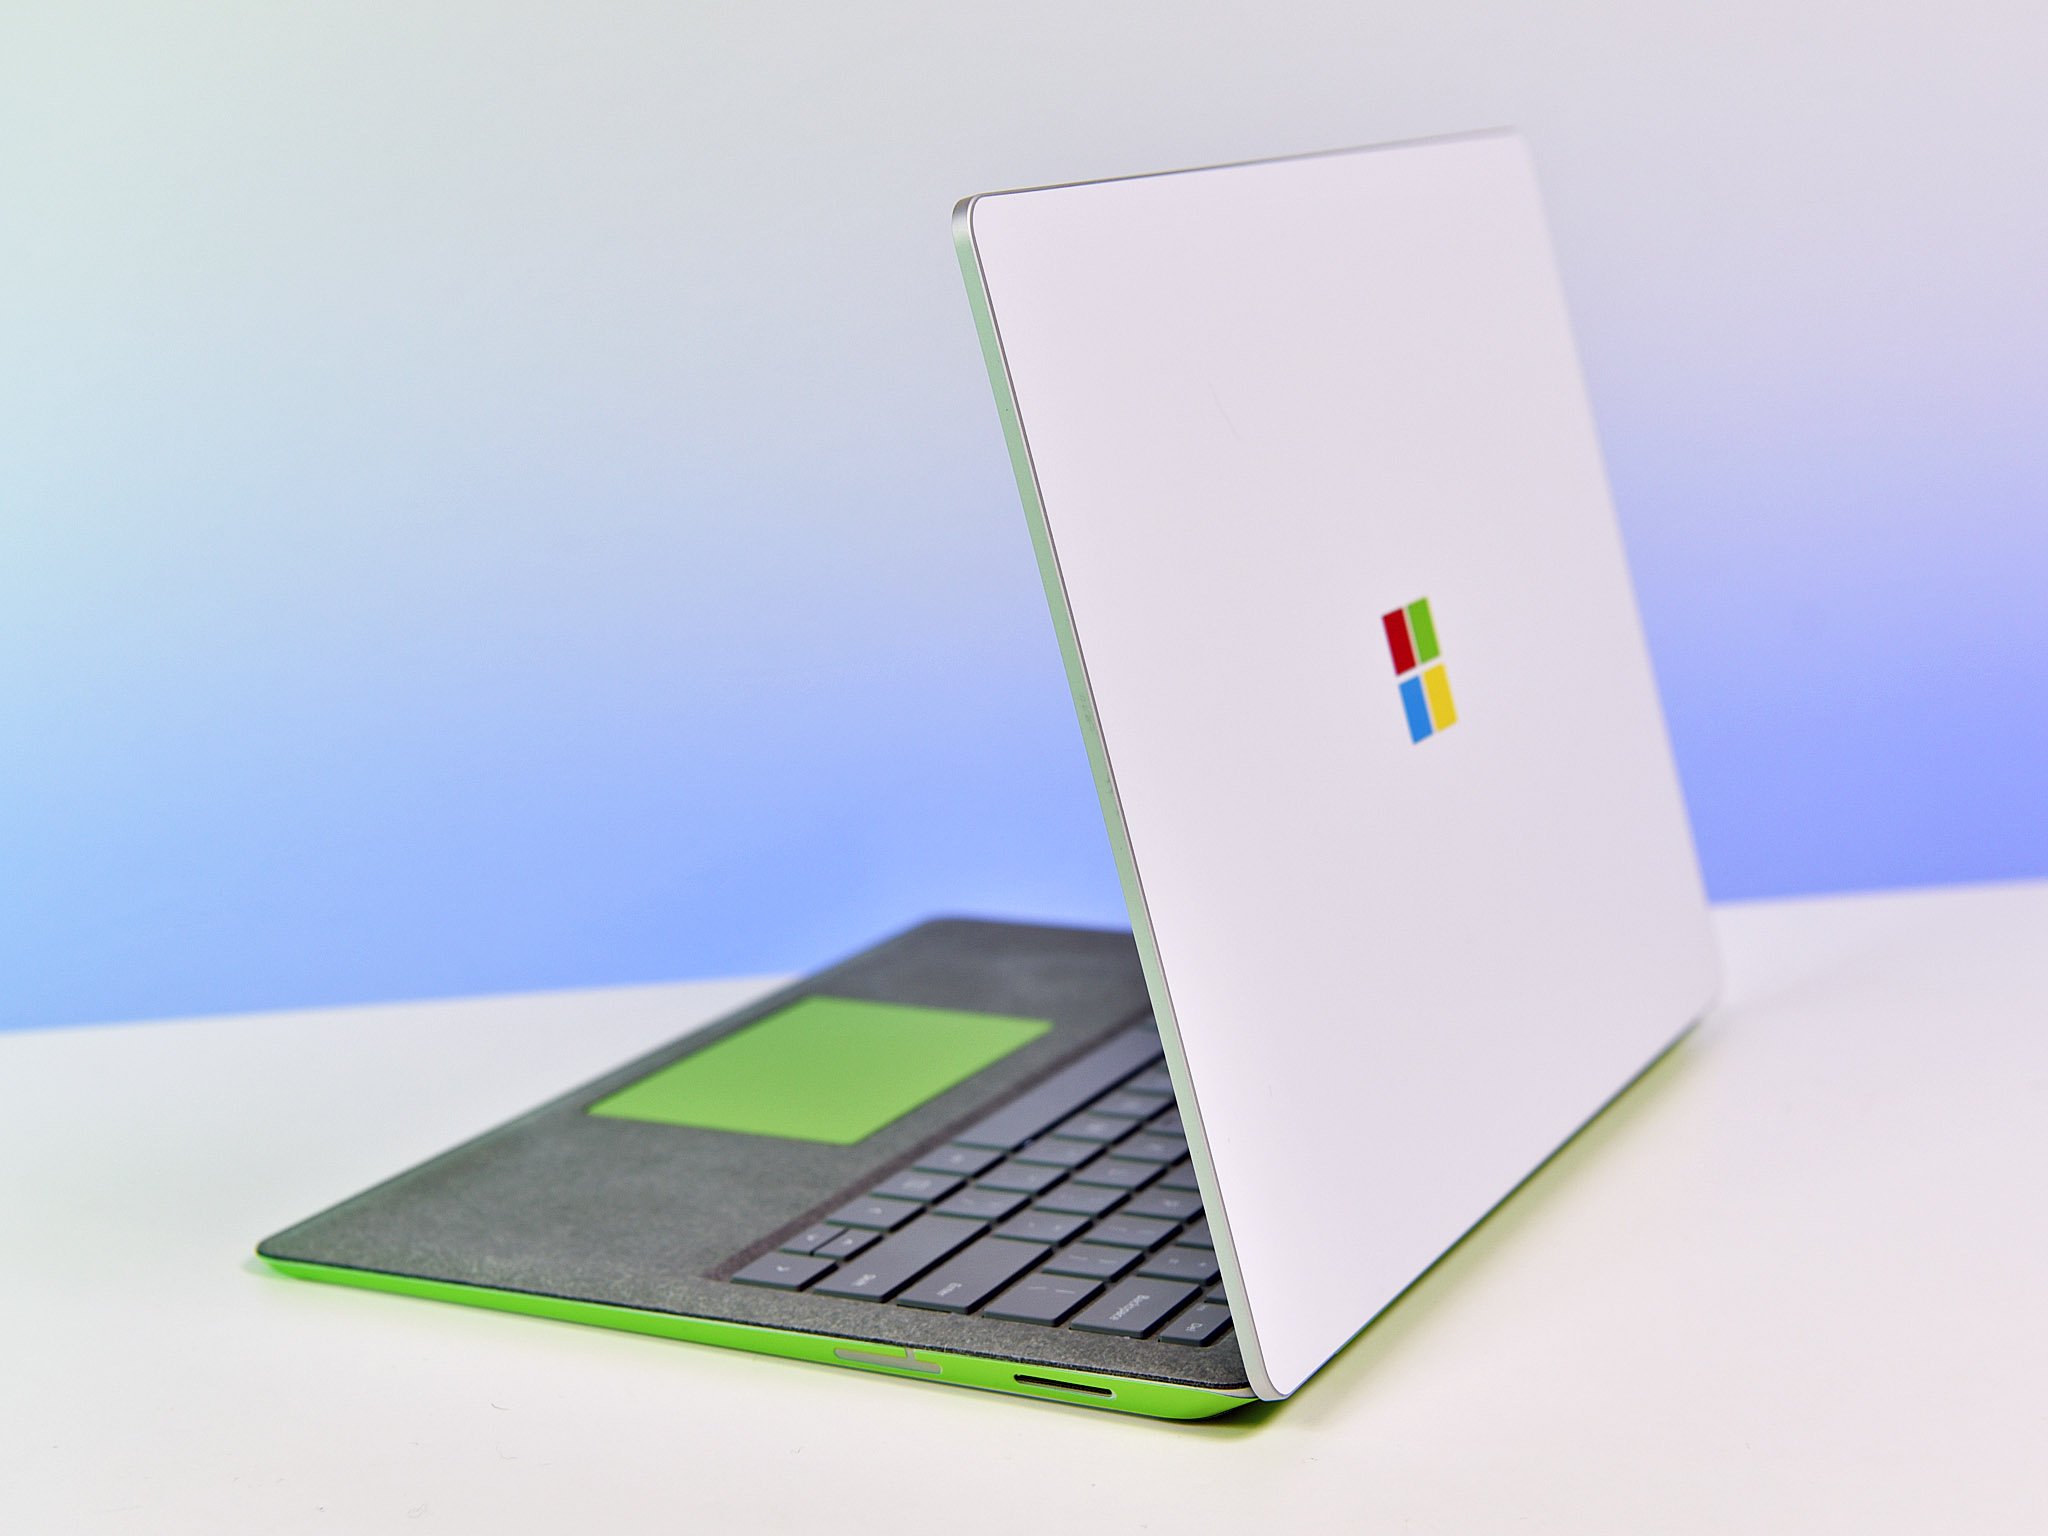 xtremeskins-for-surface-laptop-brings-a-bevy-of-color-to-protect-your